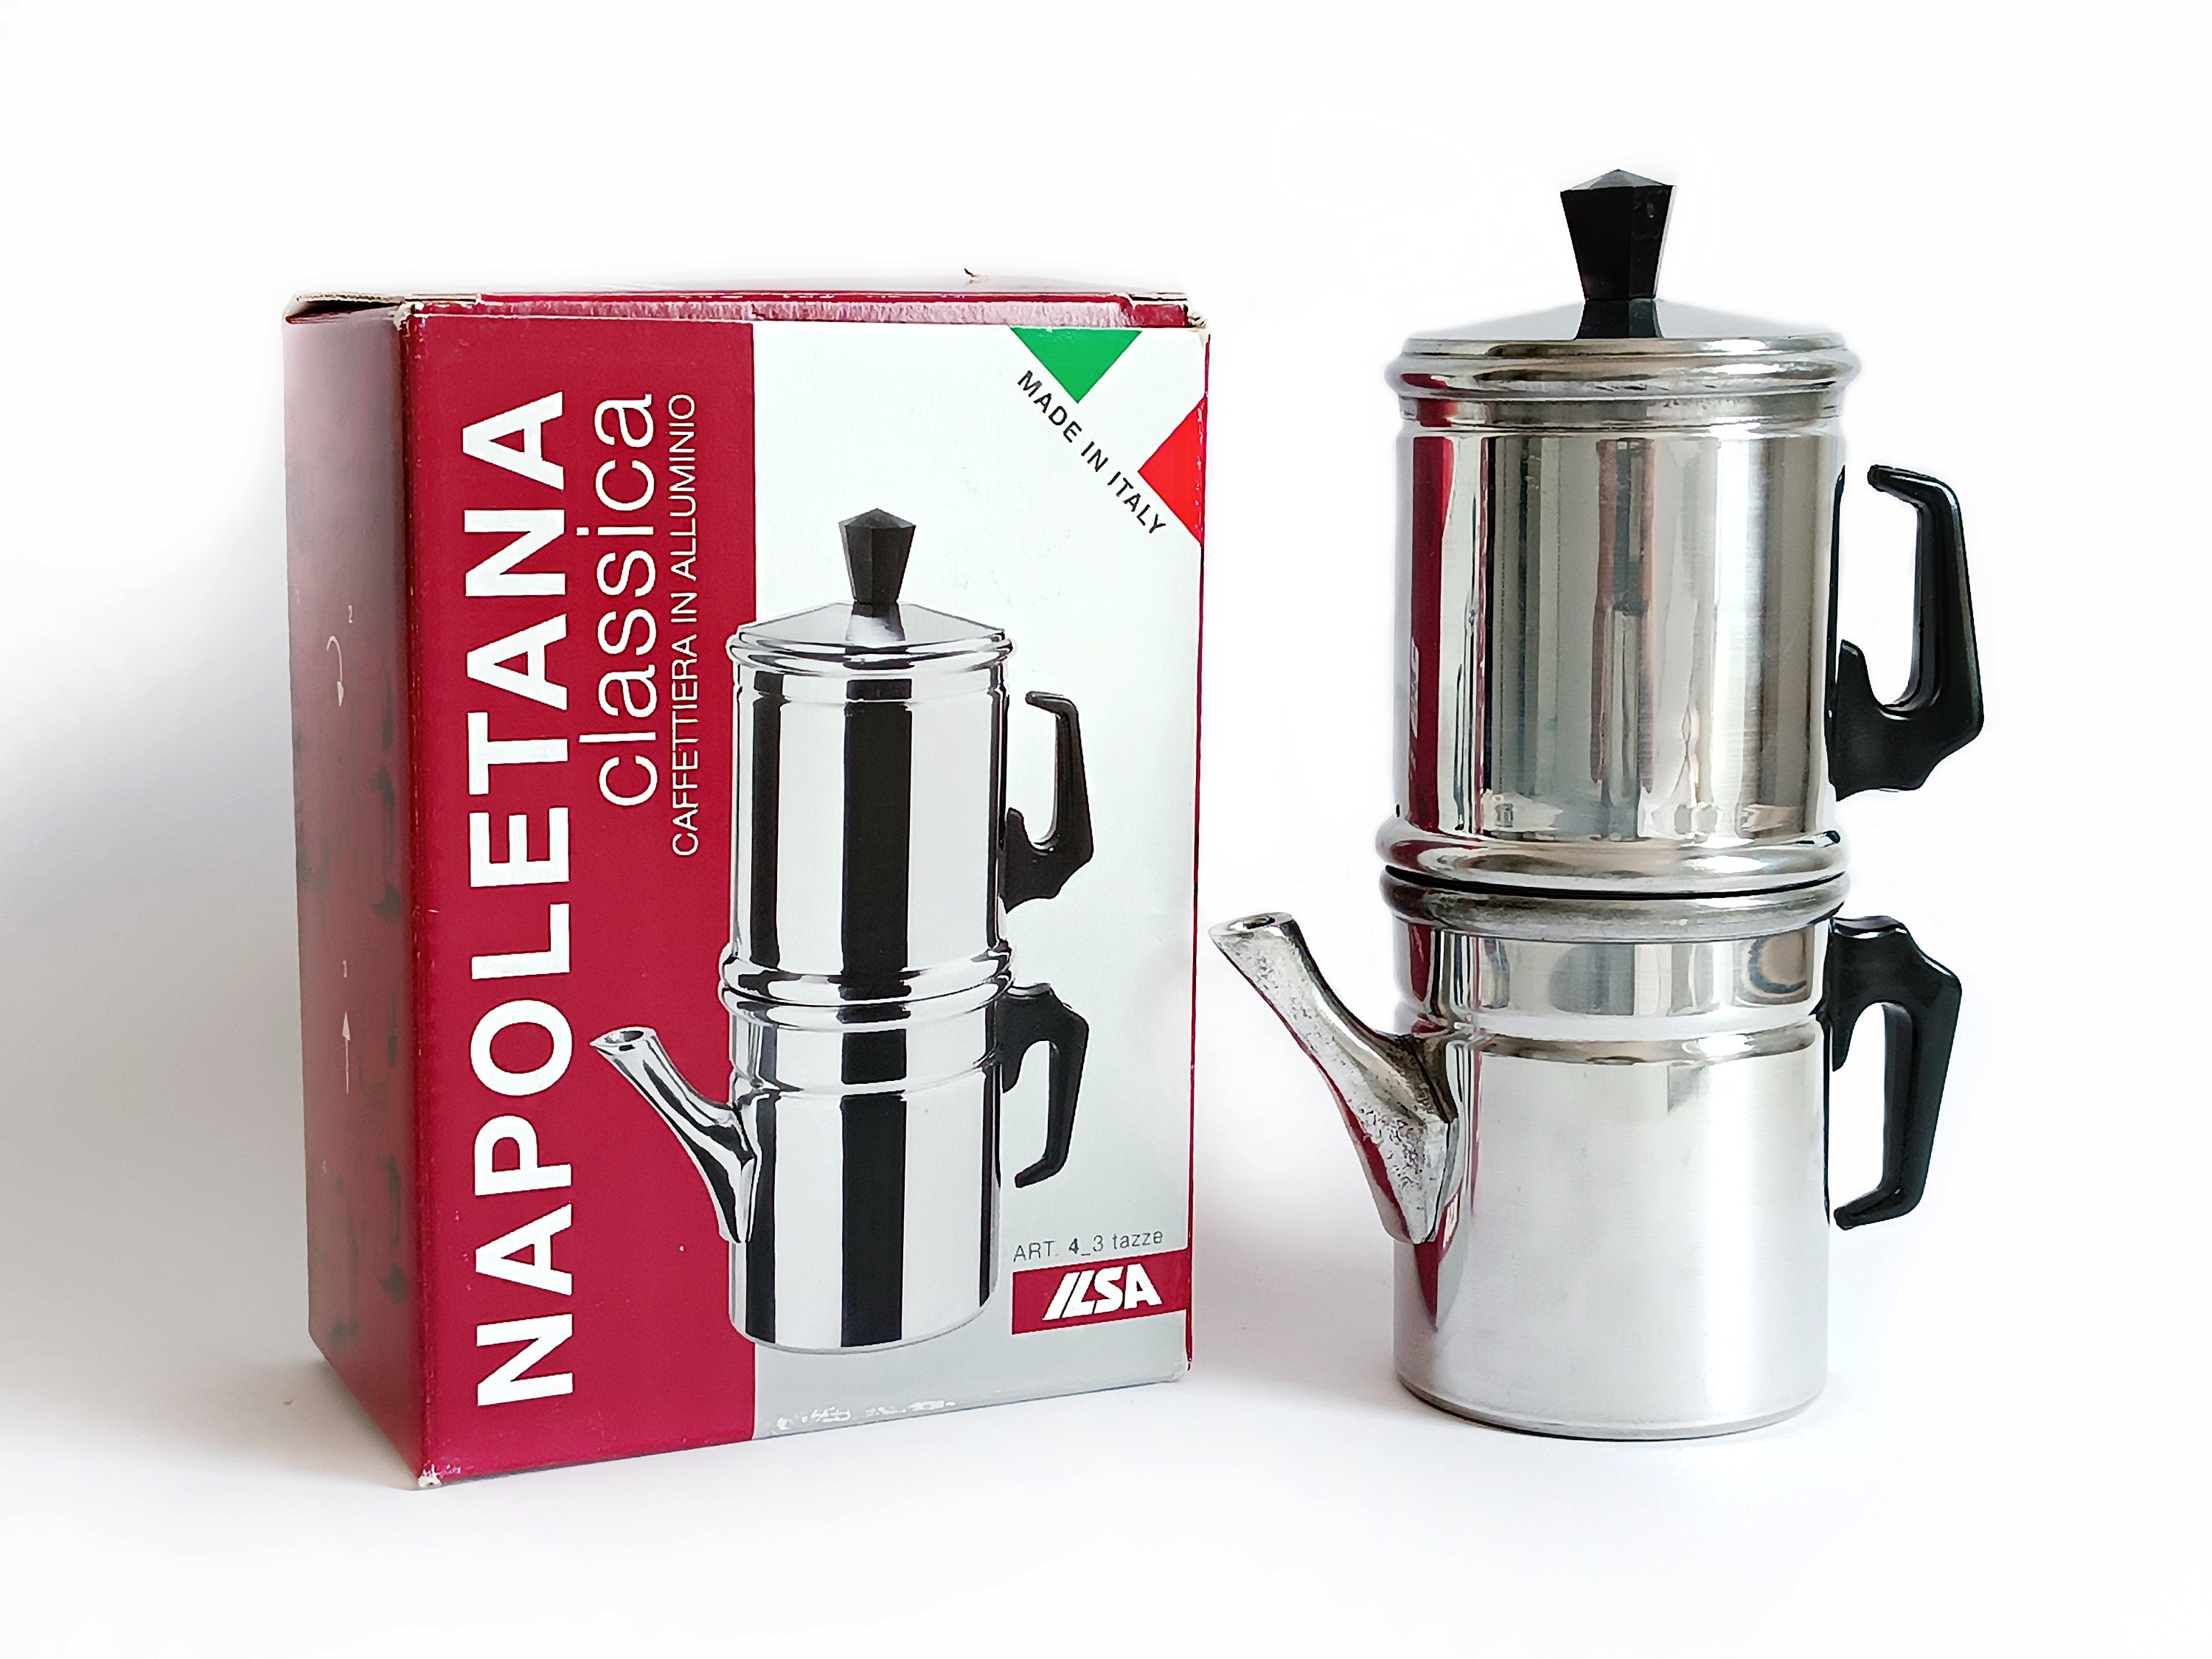  Ilsa Stainless Steel Neapolitan Drip Coffee Maker with